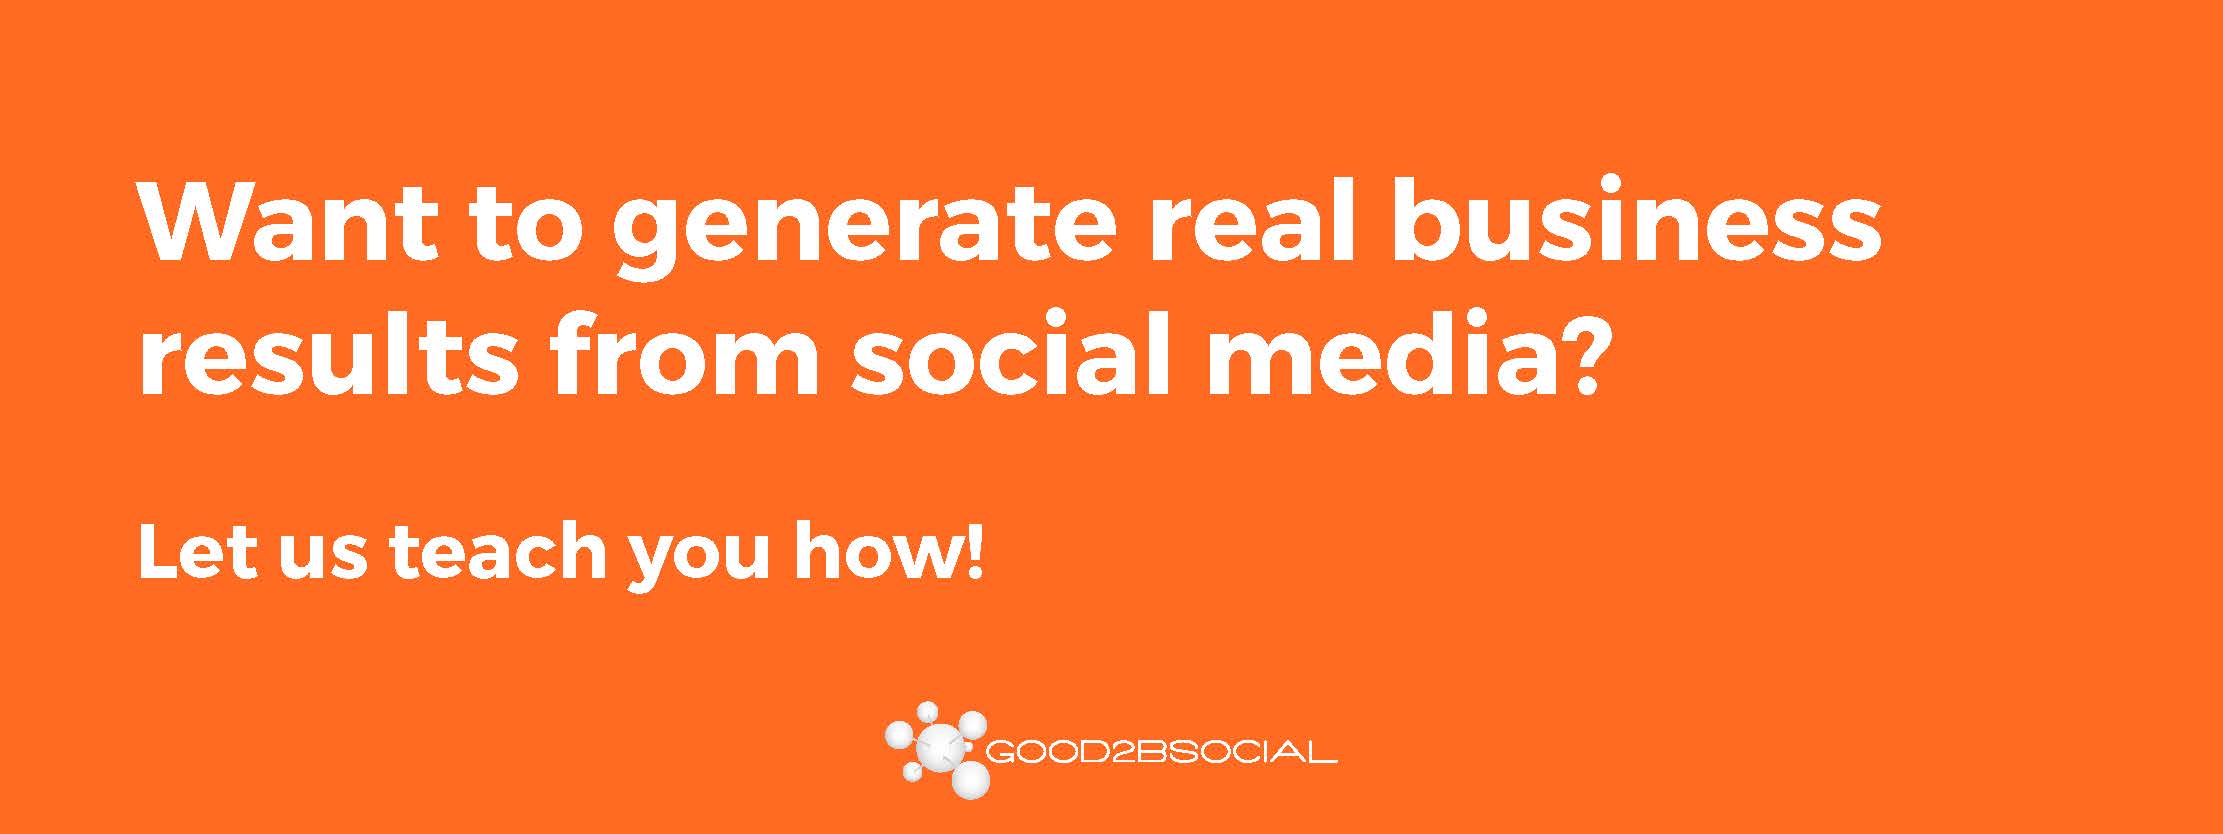 Results from Social Media for Real Business